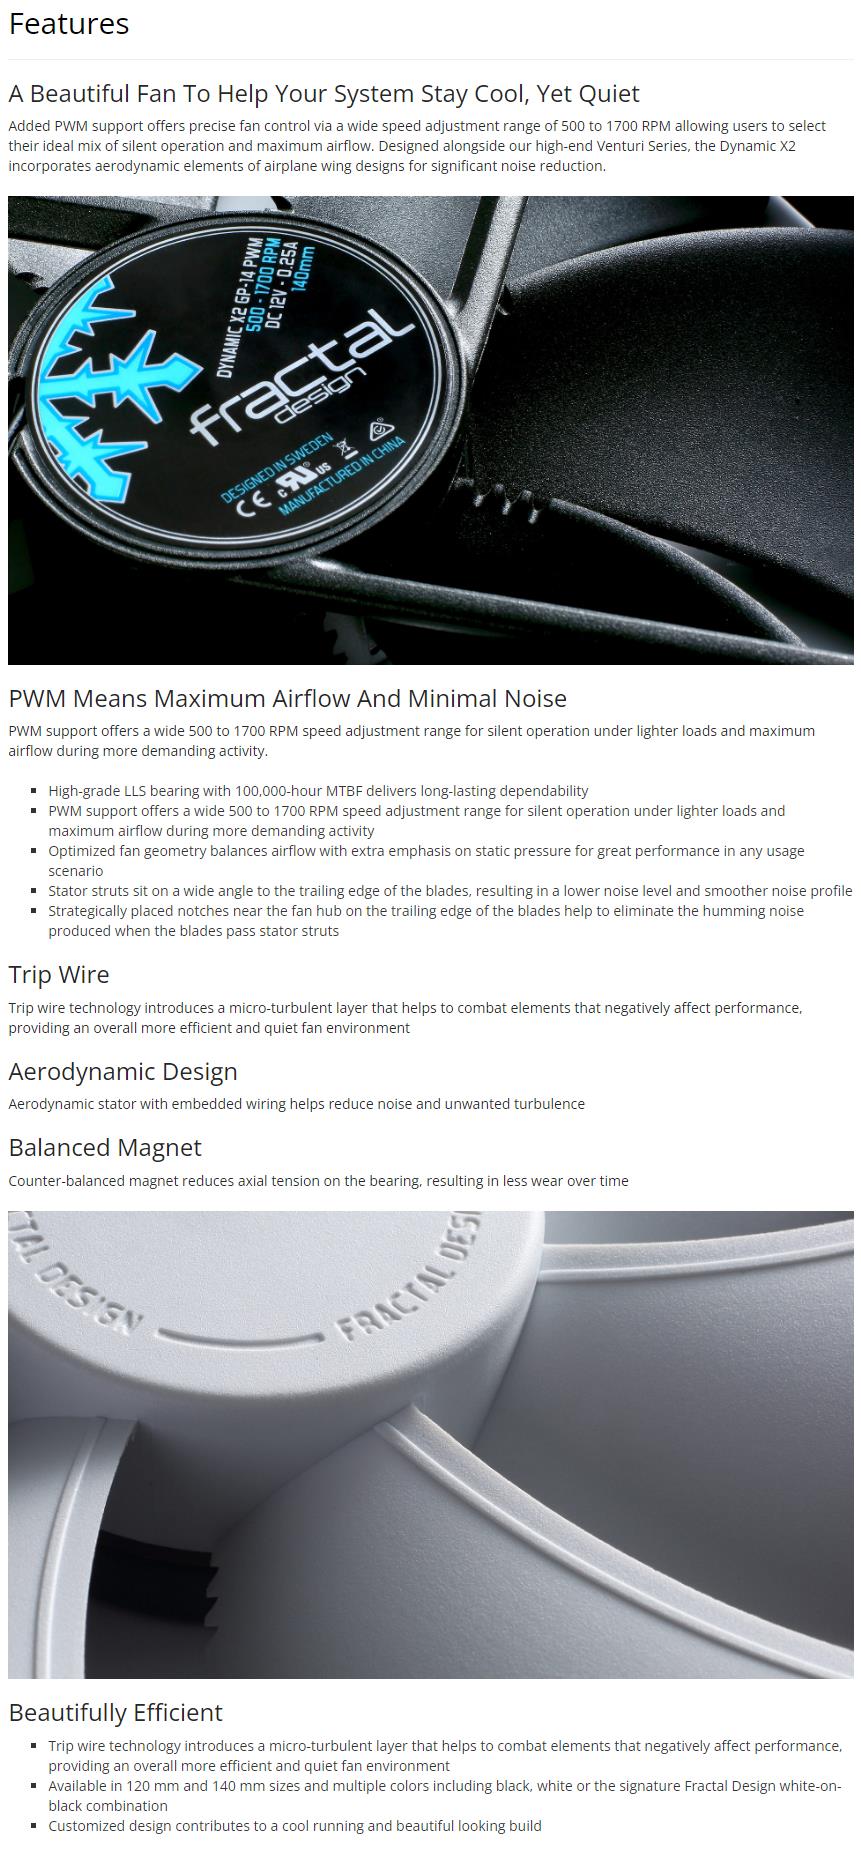 A large marketing image providing additional information about the product Fractal Design Dynamic X2 GP-14 140mm PWM Fan - White - Additional alt info not provided